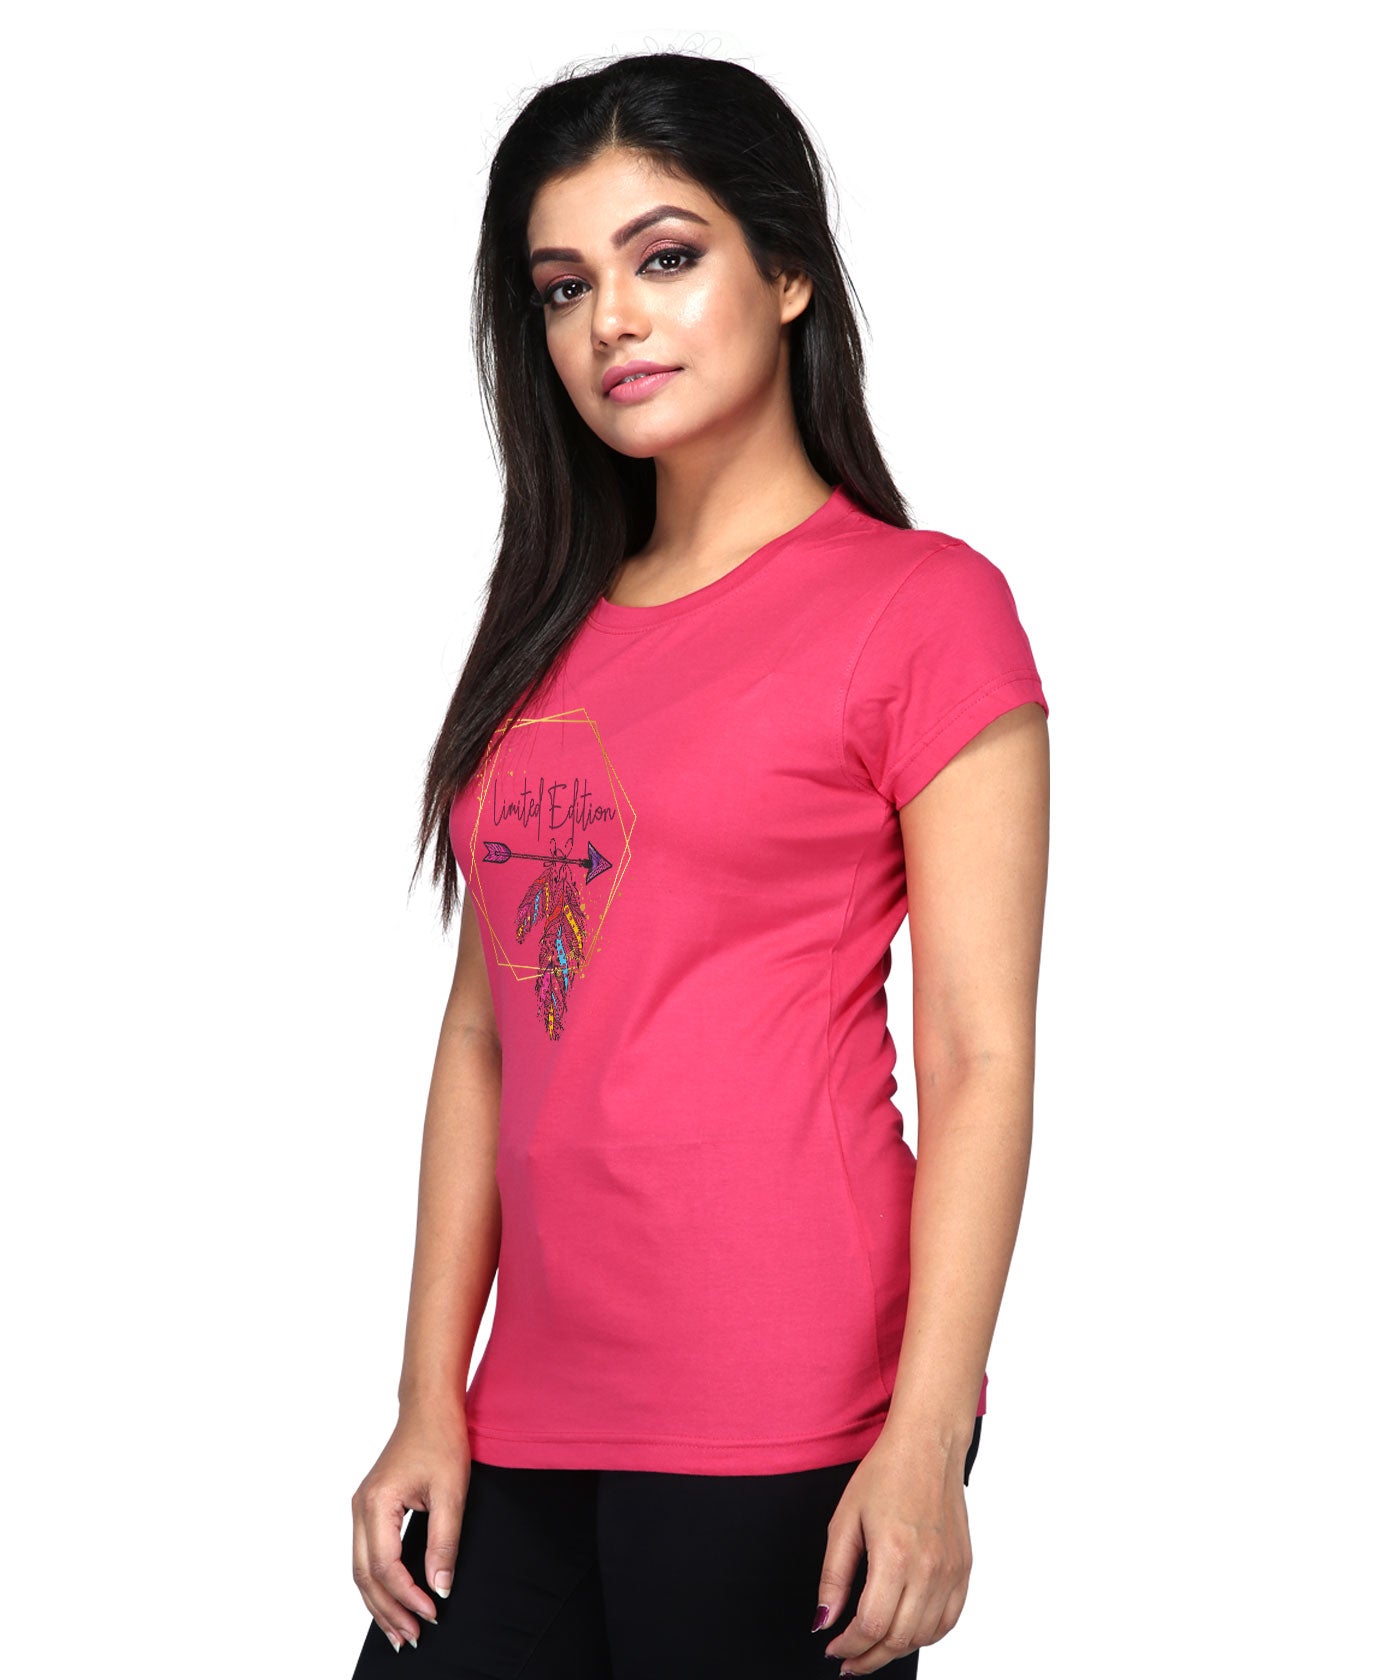 Limited Edition - Premium Round Neck Cotton Tees for Women - Magenta And White